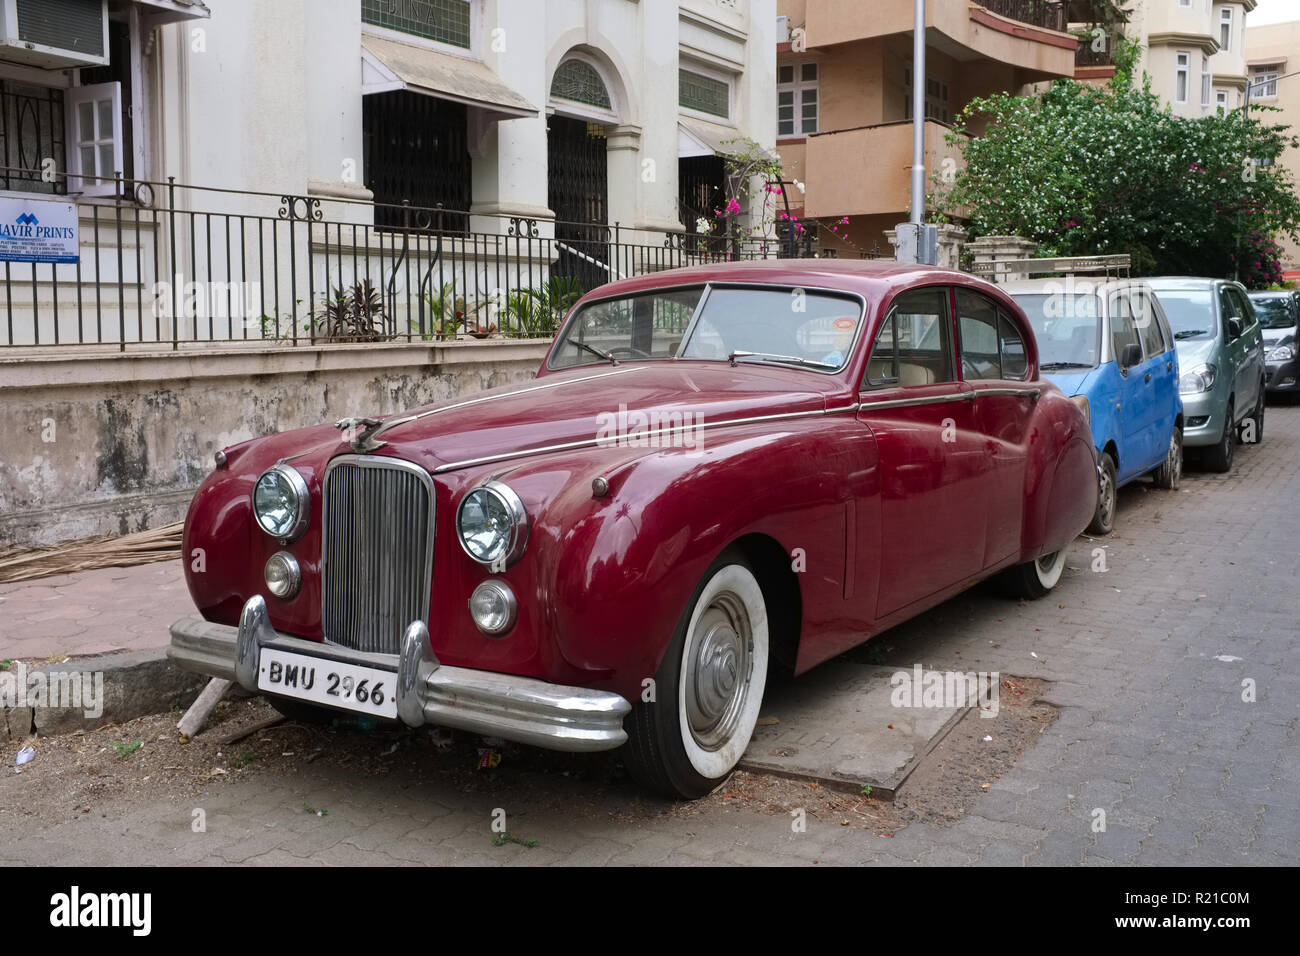 A vintage Jaguar car, owned by a wealthy Parsee - Parsees often being keen car collectors in India -, parked in Garden Road, Colaba, Mumbai, India Stock Photo